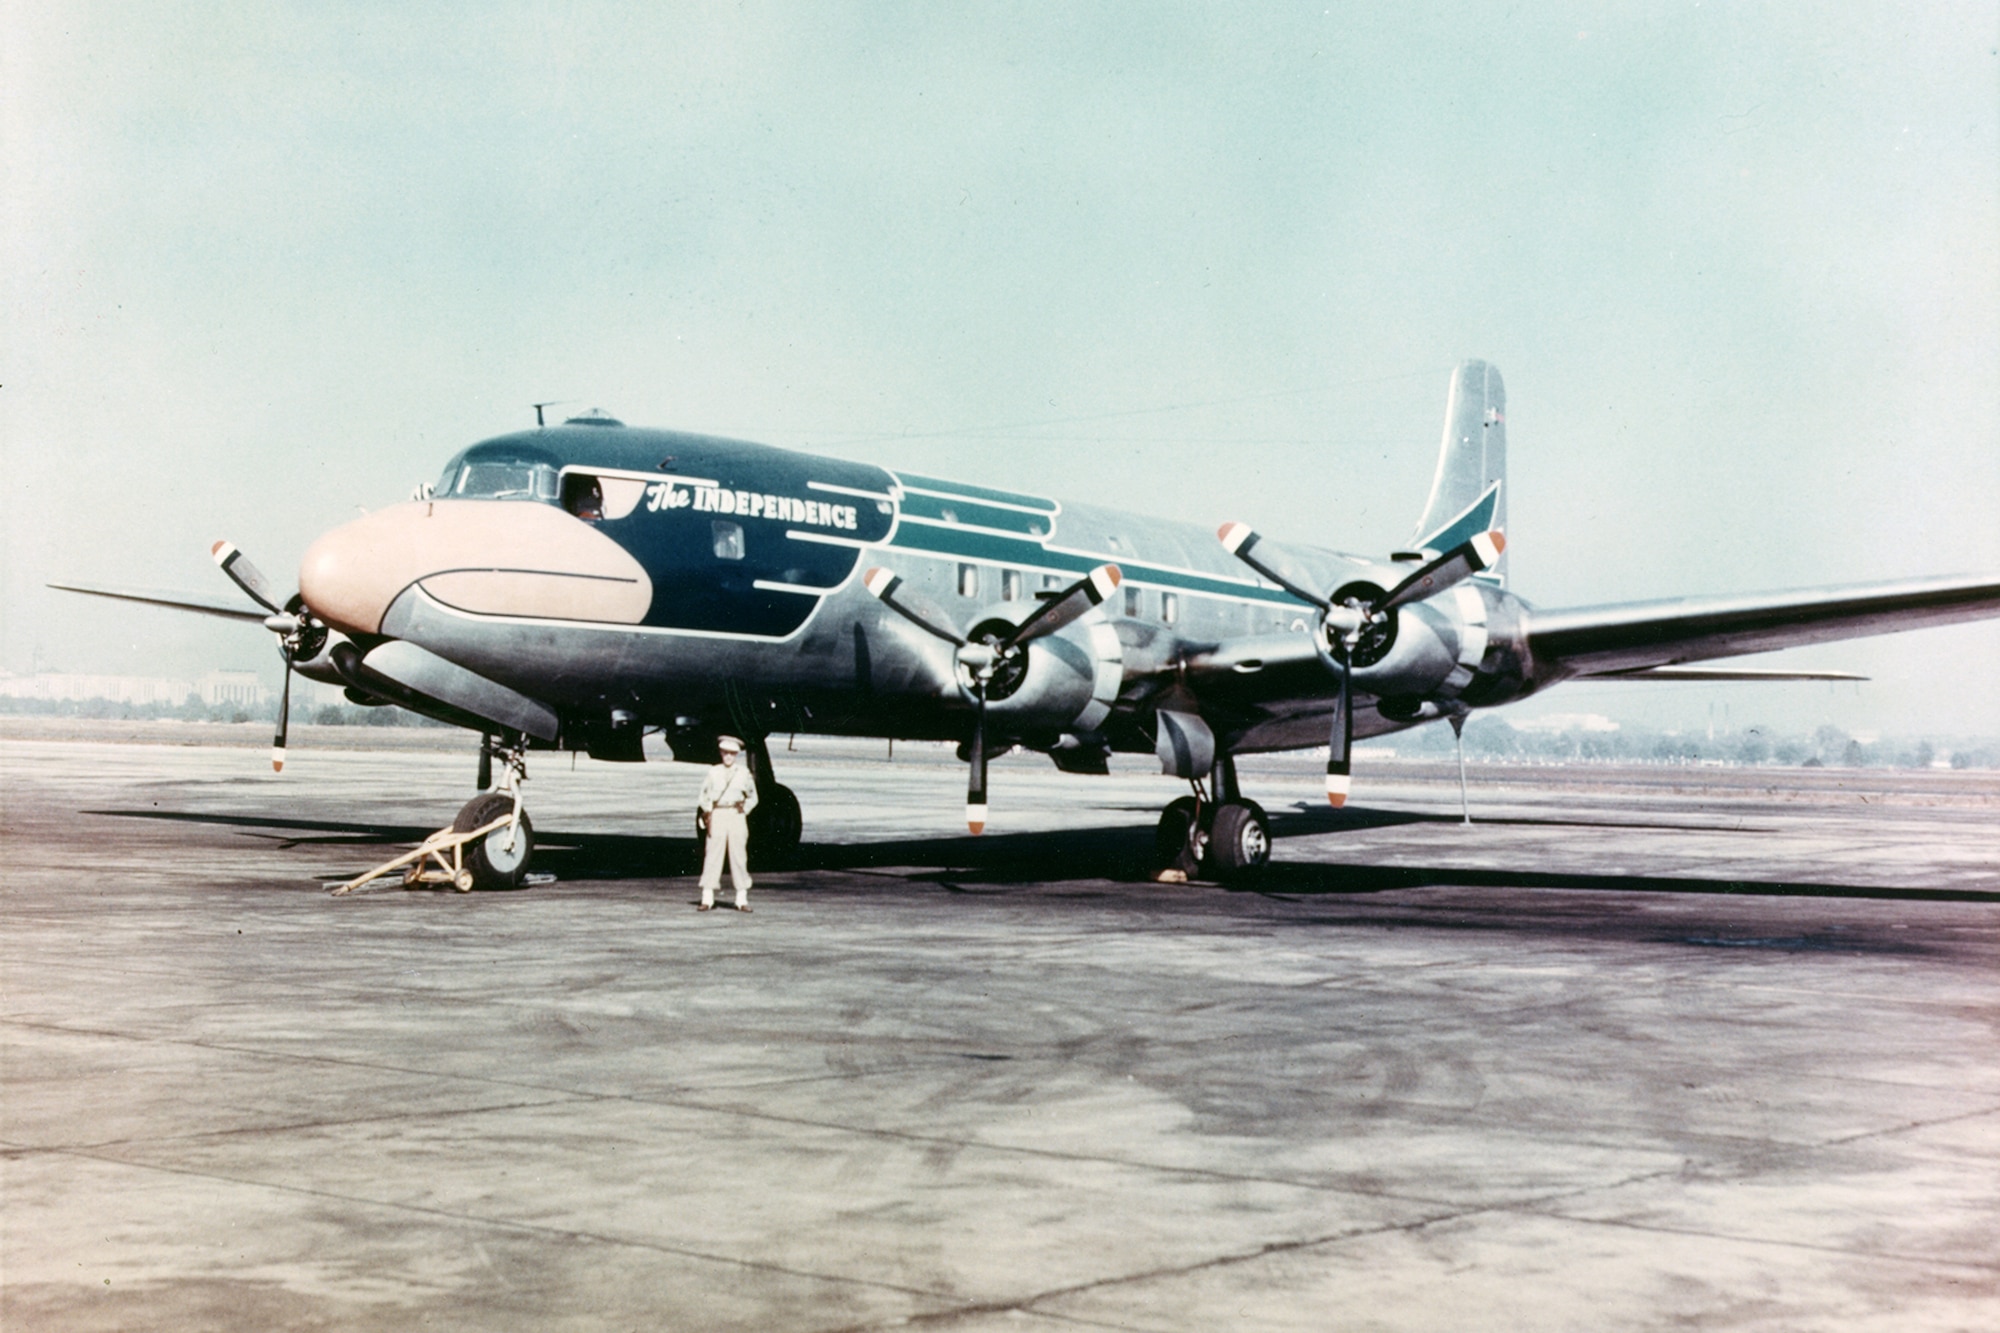 Early photograph of The Independence with a yellow eagle’s beak. It was repainted white later because the yellow paint interfered with the weather radar. (U.S. Air Force photo)